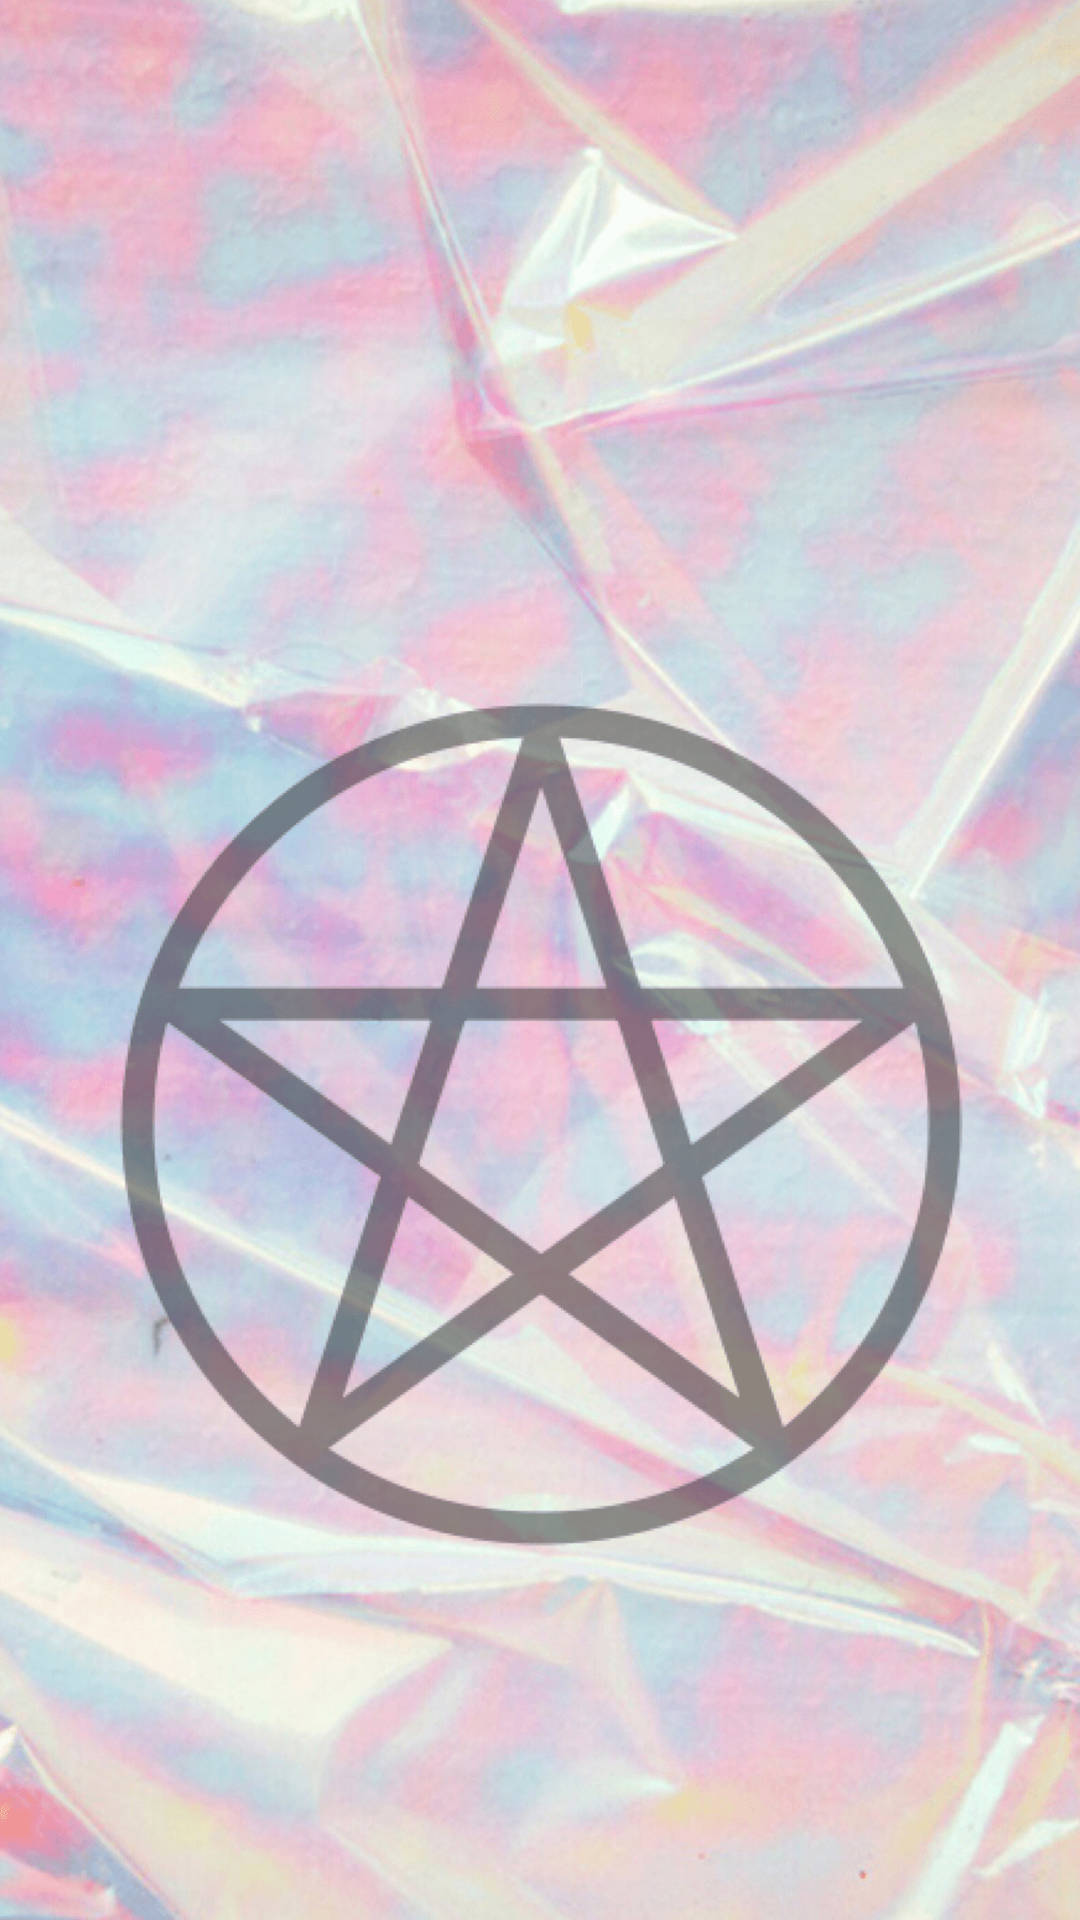 Caption: "Embrace the Mystical Witchy Aesthetic with Iridescent Pentacle" Wallpaper